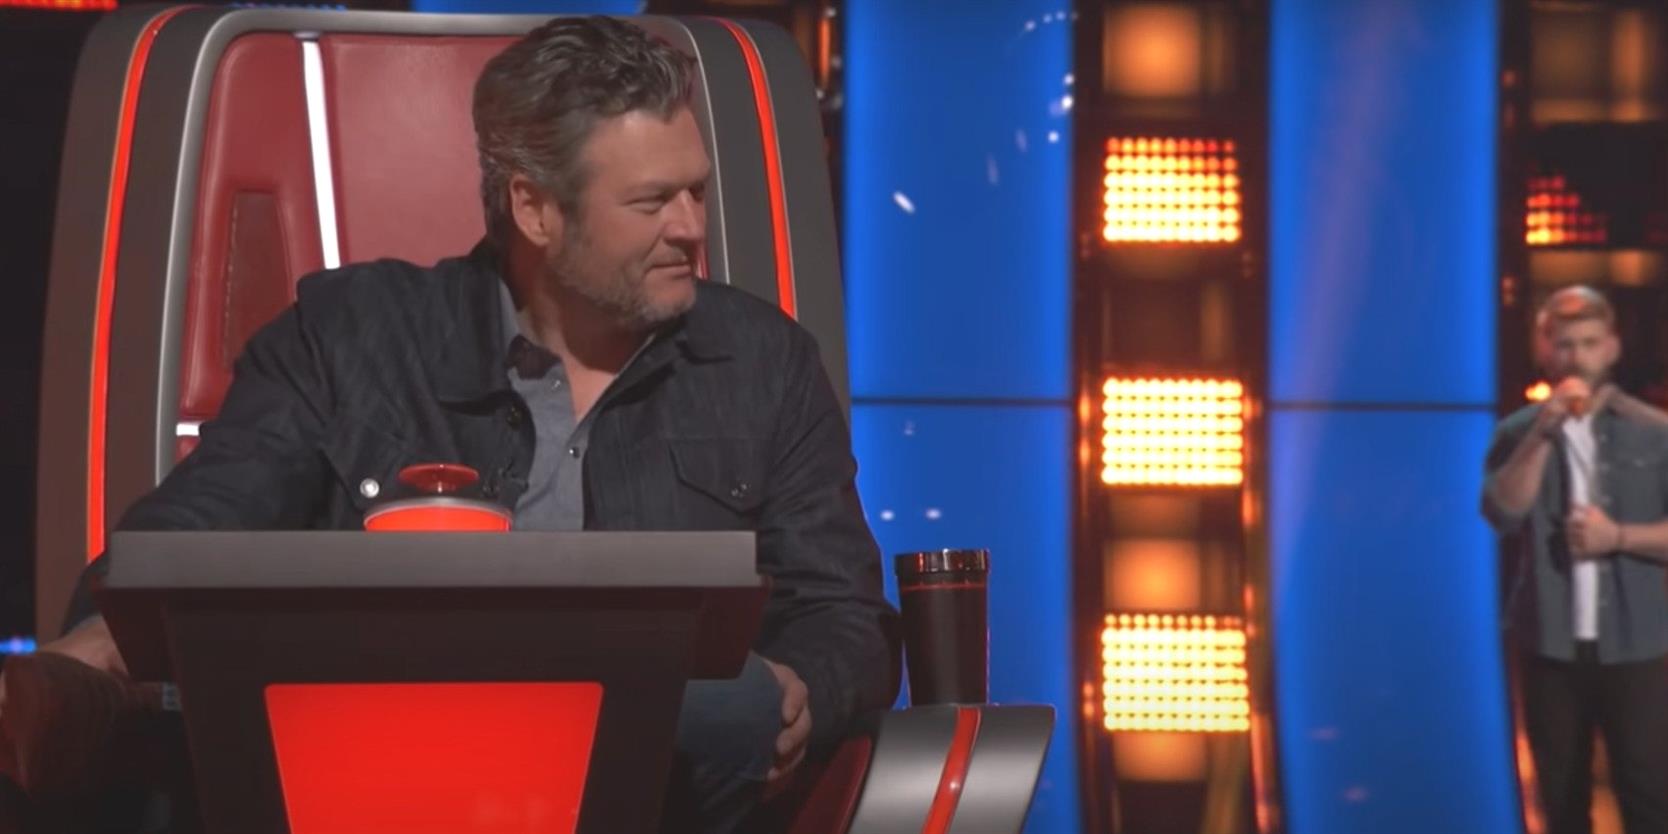 Blake Shelton quittetil The Voice YUBr0O 1 1